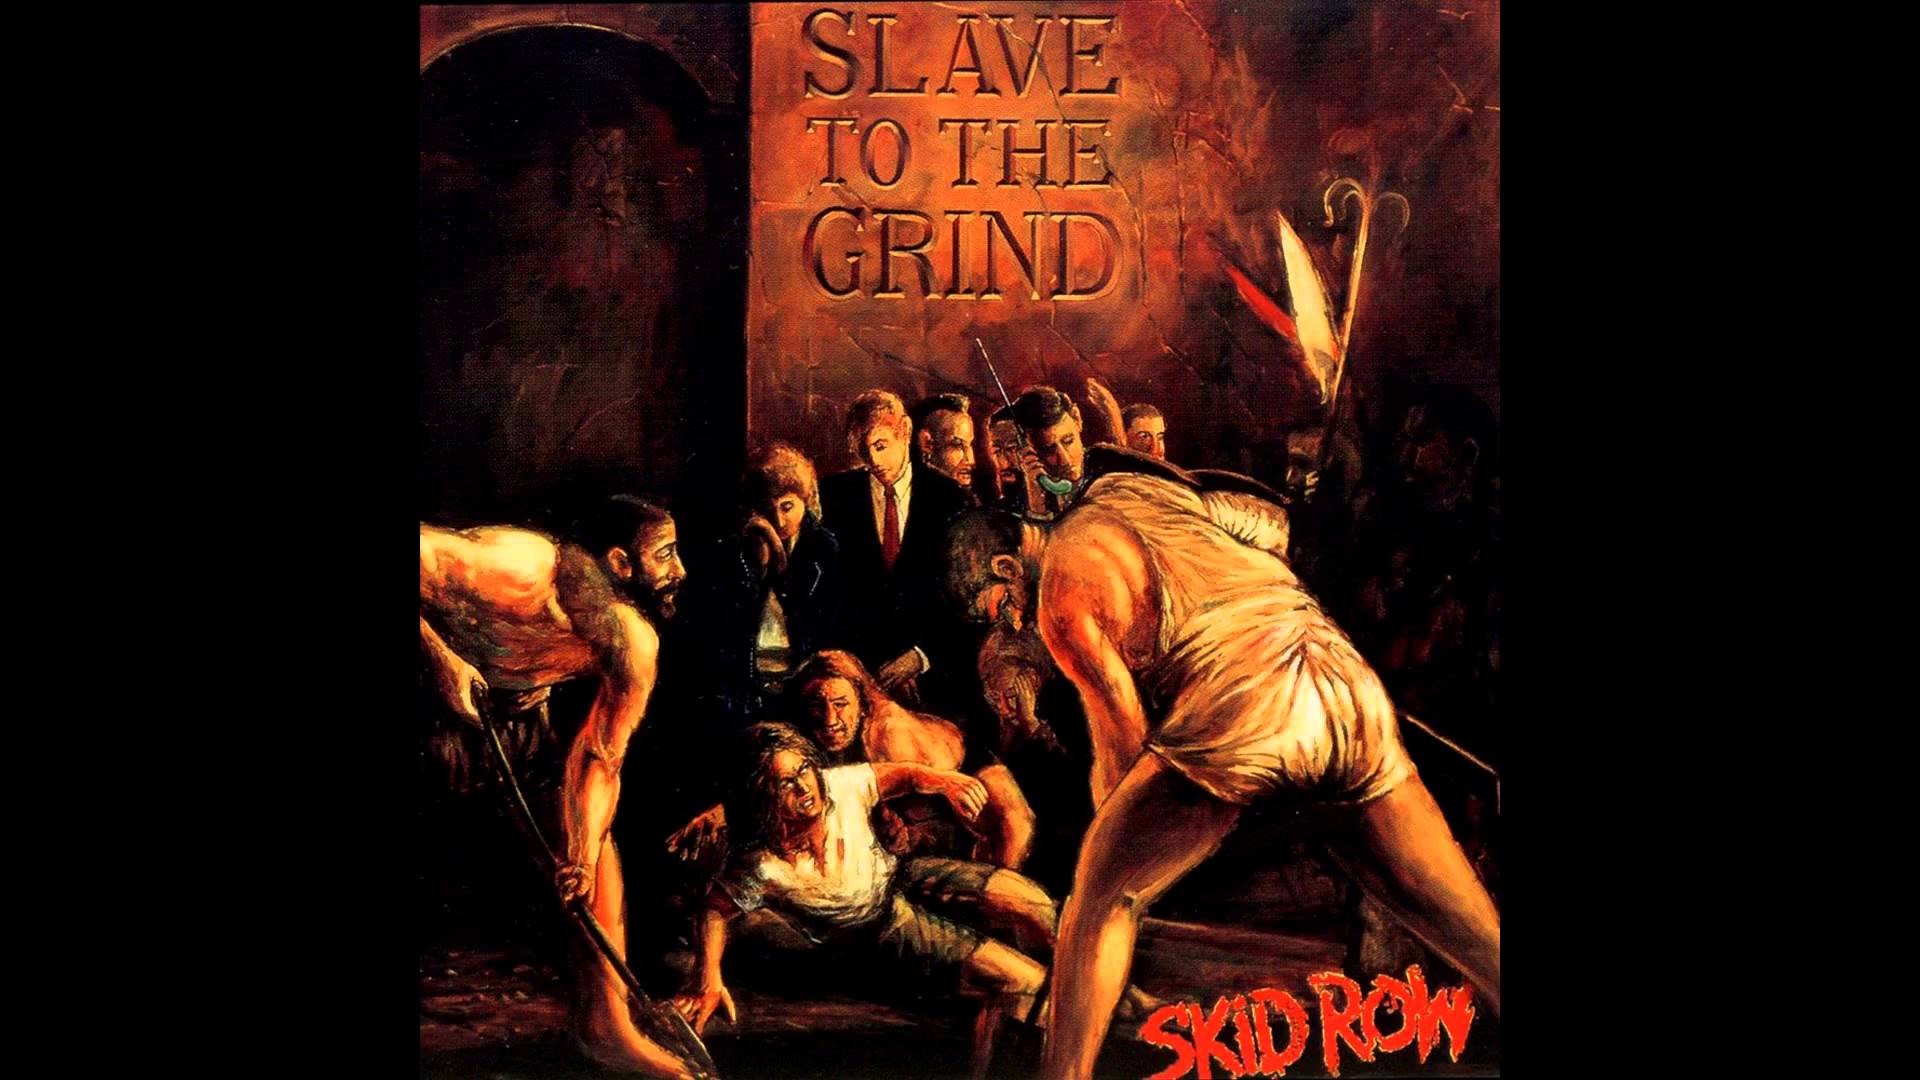 1920x1080 Skid Row - Slave to the grind Full album - YouTube